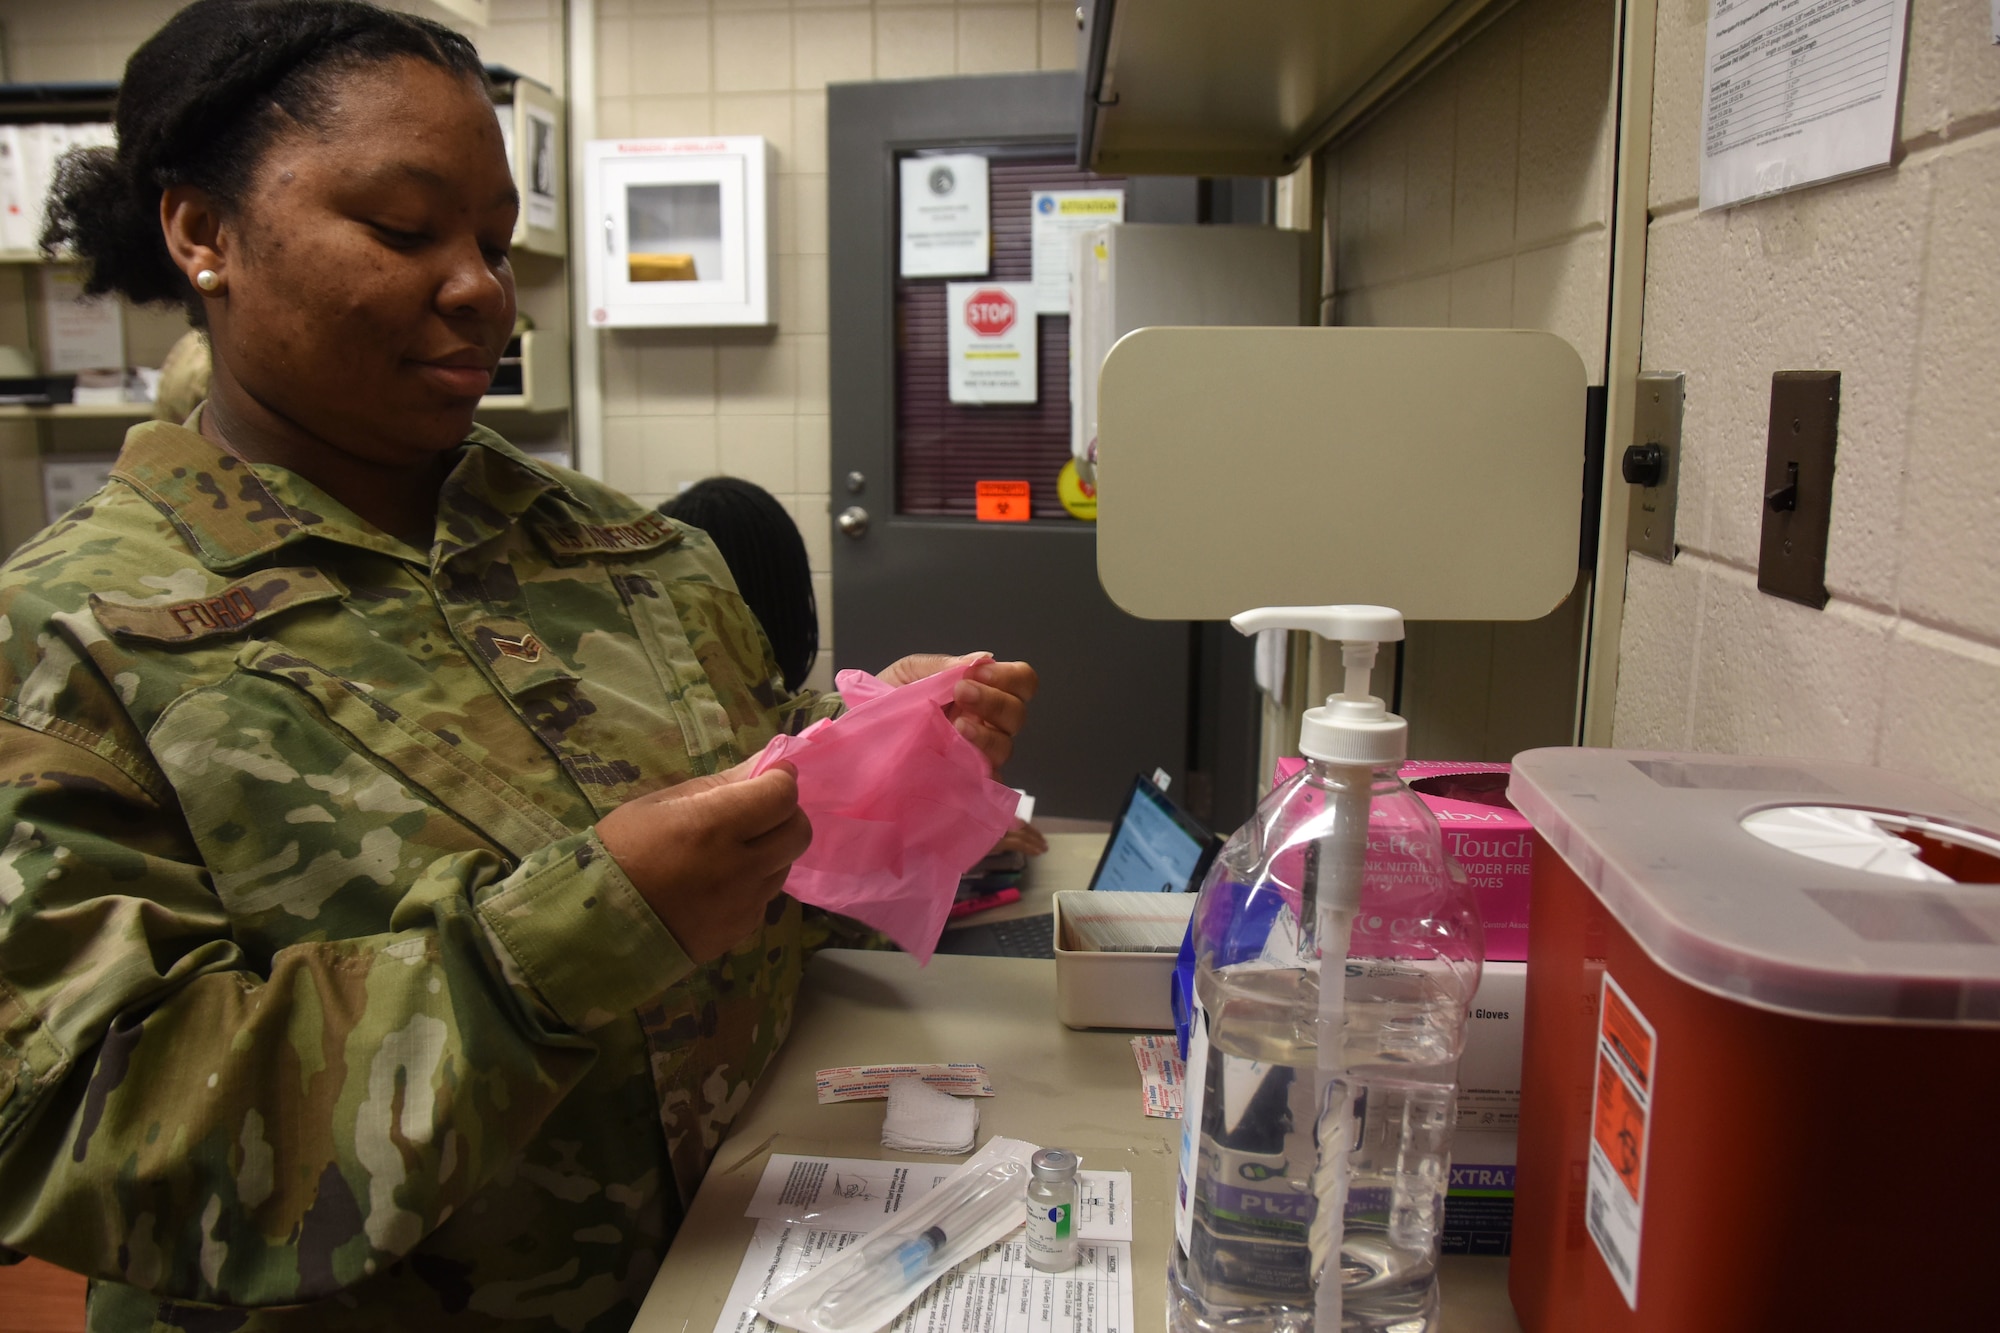 U.S. Air Force Senior Airman Cynthia Ford, 145th Medical Group technician, dons gloves in preparation for giving an immunization at the North Carolina (N.C.) Air National Guard Base, Charlotte Douglas International Airport, Mar. 7, 2020. Senior Airman Ford works as a traditional Guardsman but also serves, in her civilian life, as a Manager for the Department of Juvenile Justice in Marion, S.C. Senior Airman Ford has authored a book titled, ‘Free As An Uncaged Bird,’ which helps acts as a positive and motivational journal, empowering youth and adults. Senior Airman Ford was recently nominated by WBTW News 13 in her local area as Woman of the Year for one of their segments; she has won for her area and will fly to New York mid-March to compete for Woman of the Year Nationally.